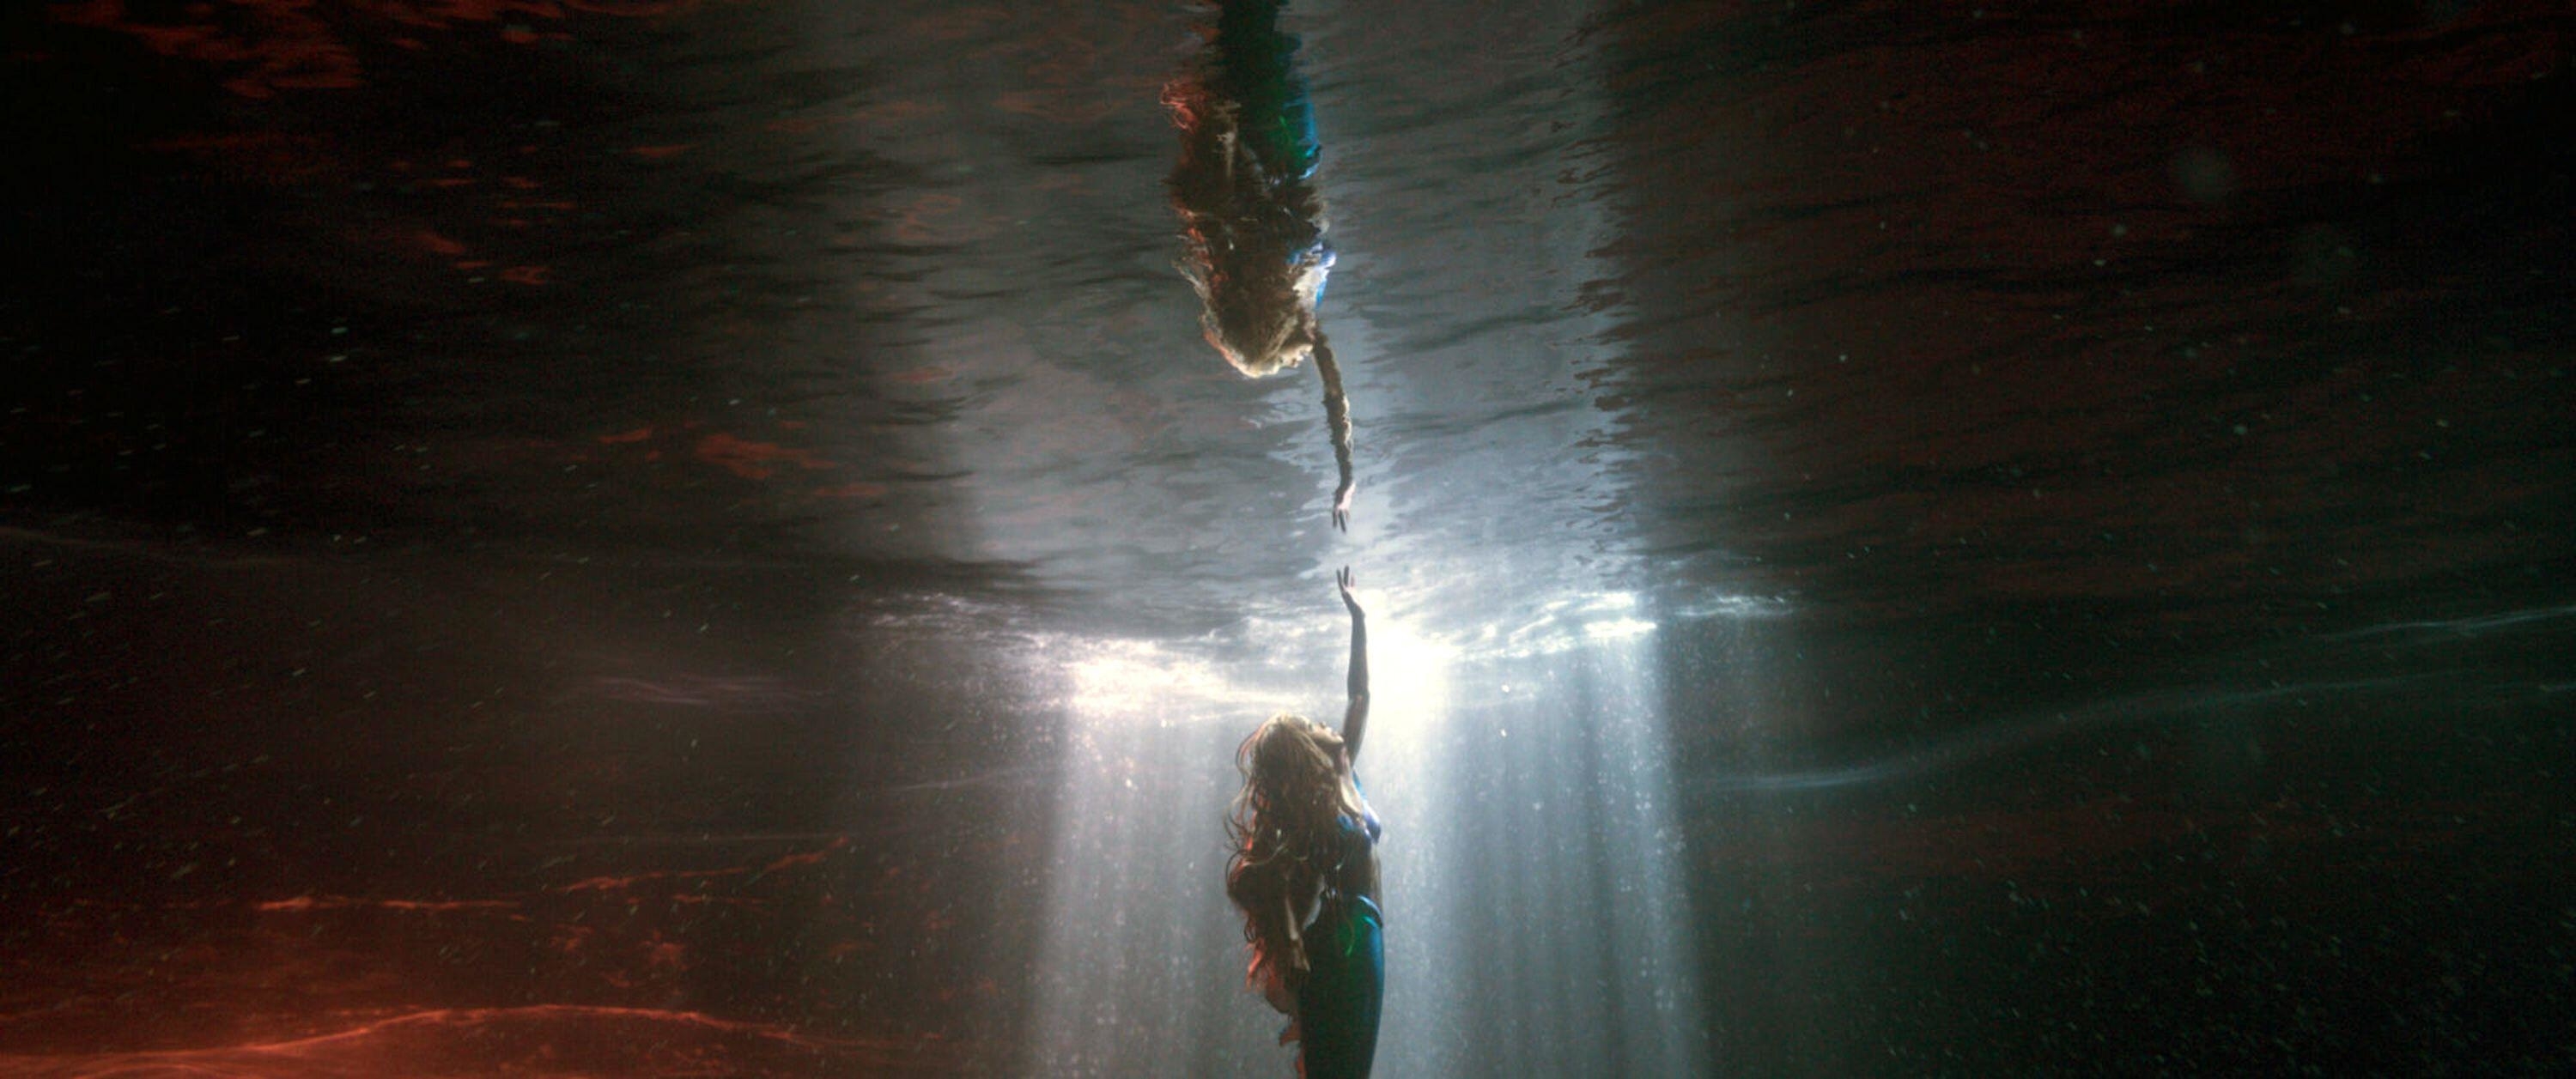 A mermaid reaches out to a spot of light peaking through the ocean surface